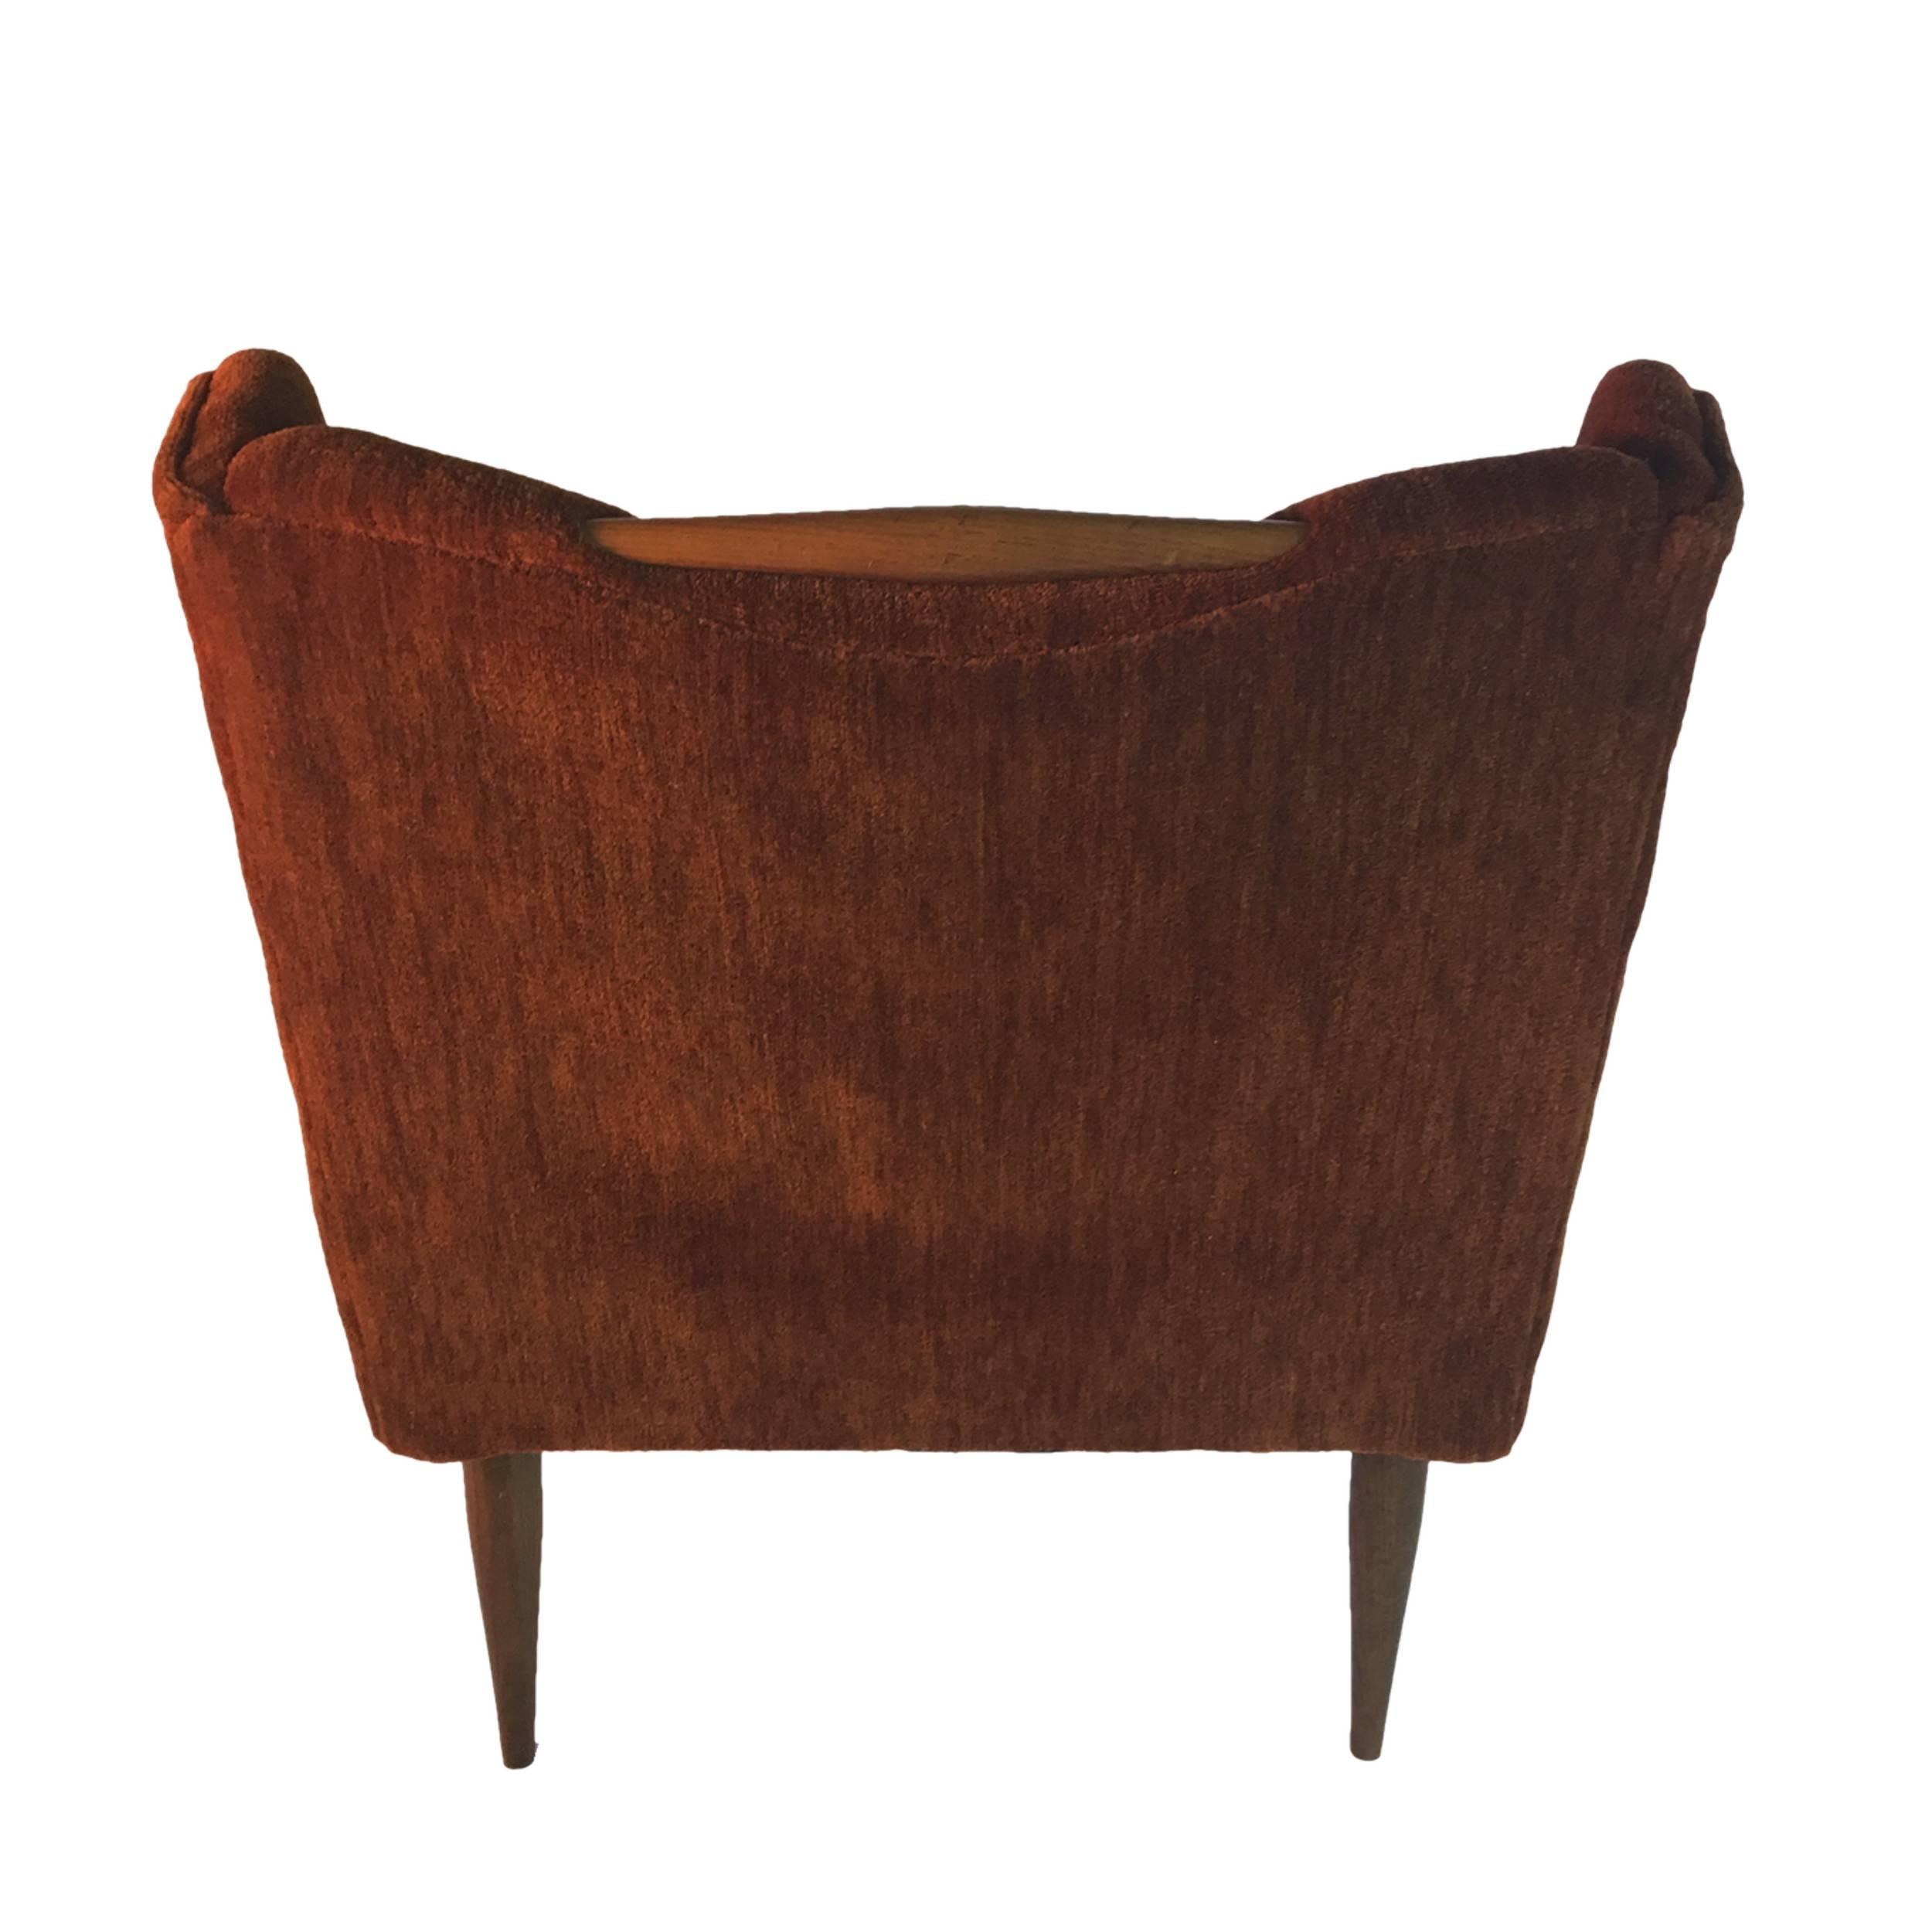 American Sculptural Midcentury Harvey Probber Slipper Lounge Chairs with Walnut Detail